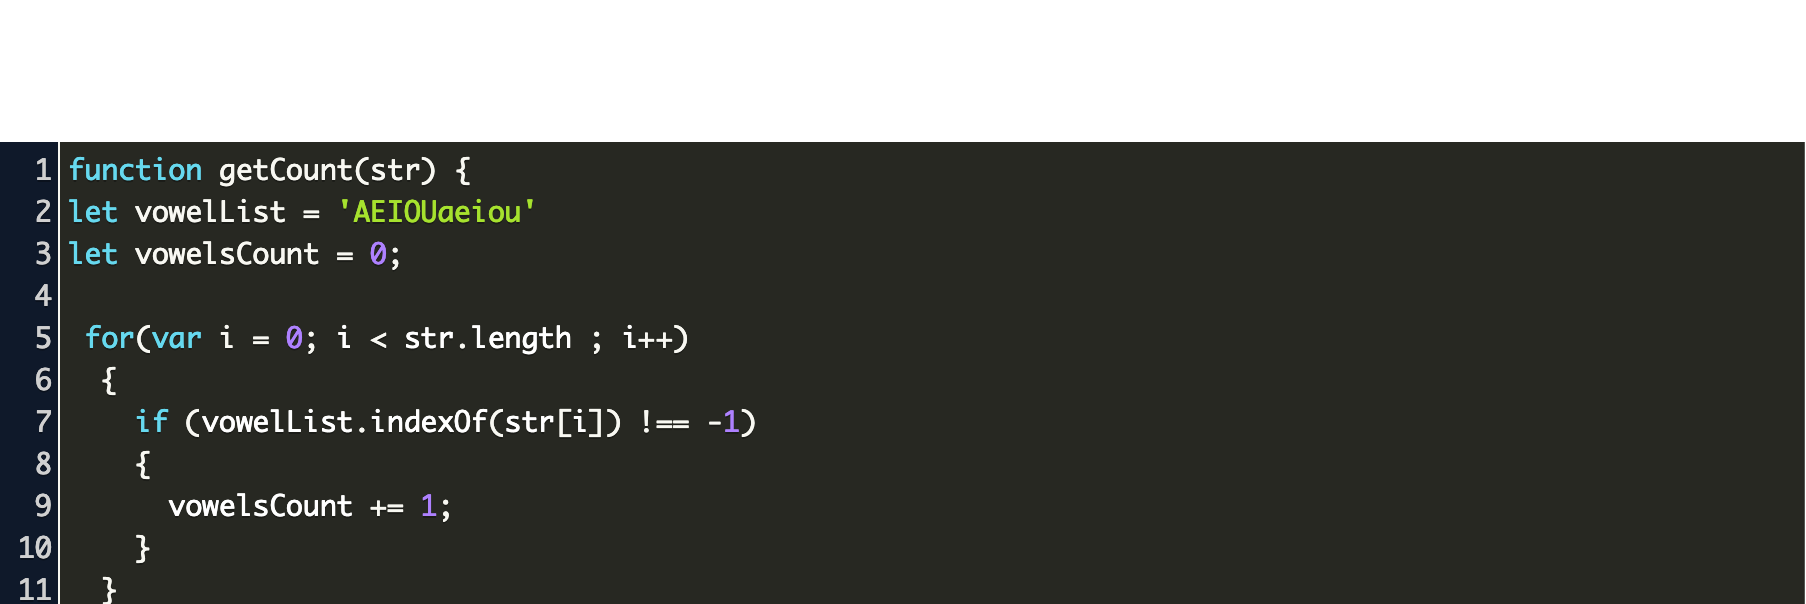 Write a function that takes in a string and then prints out all